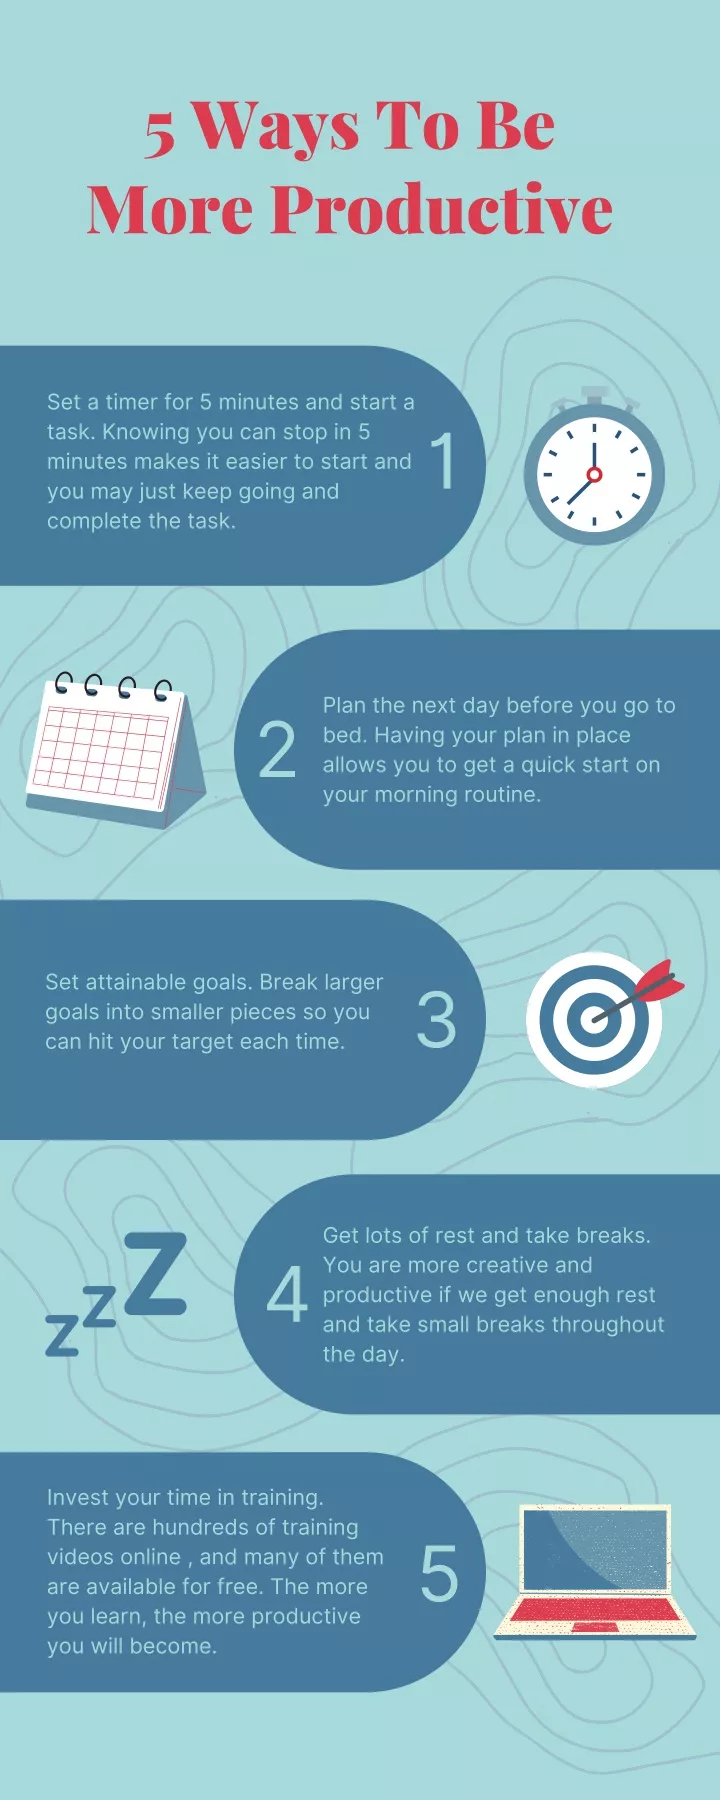 5 ways to be more productive